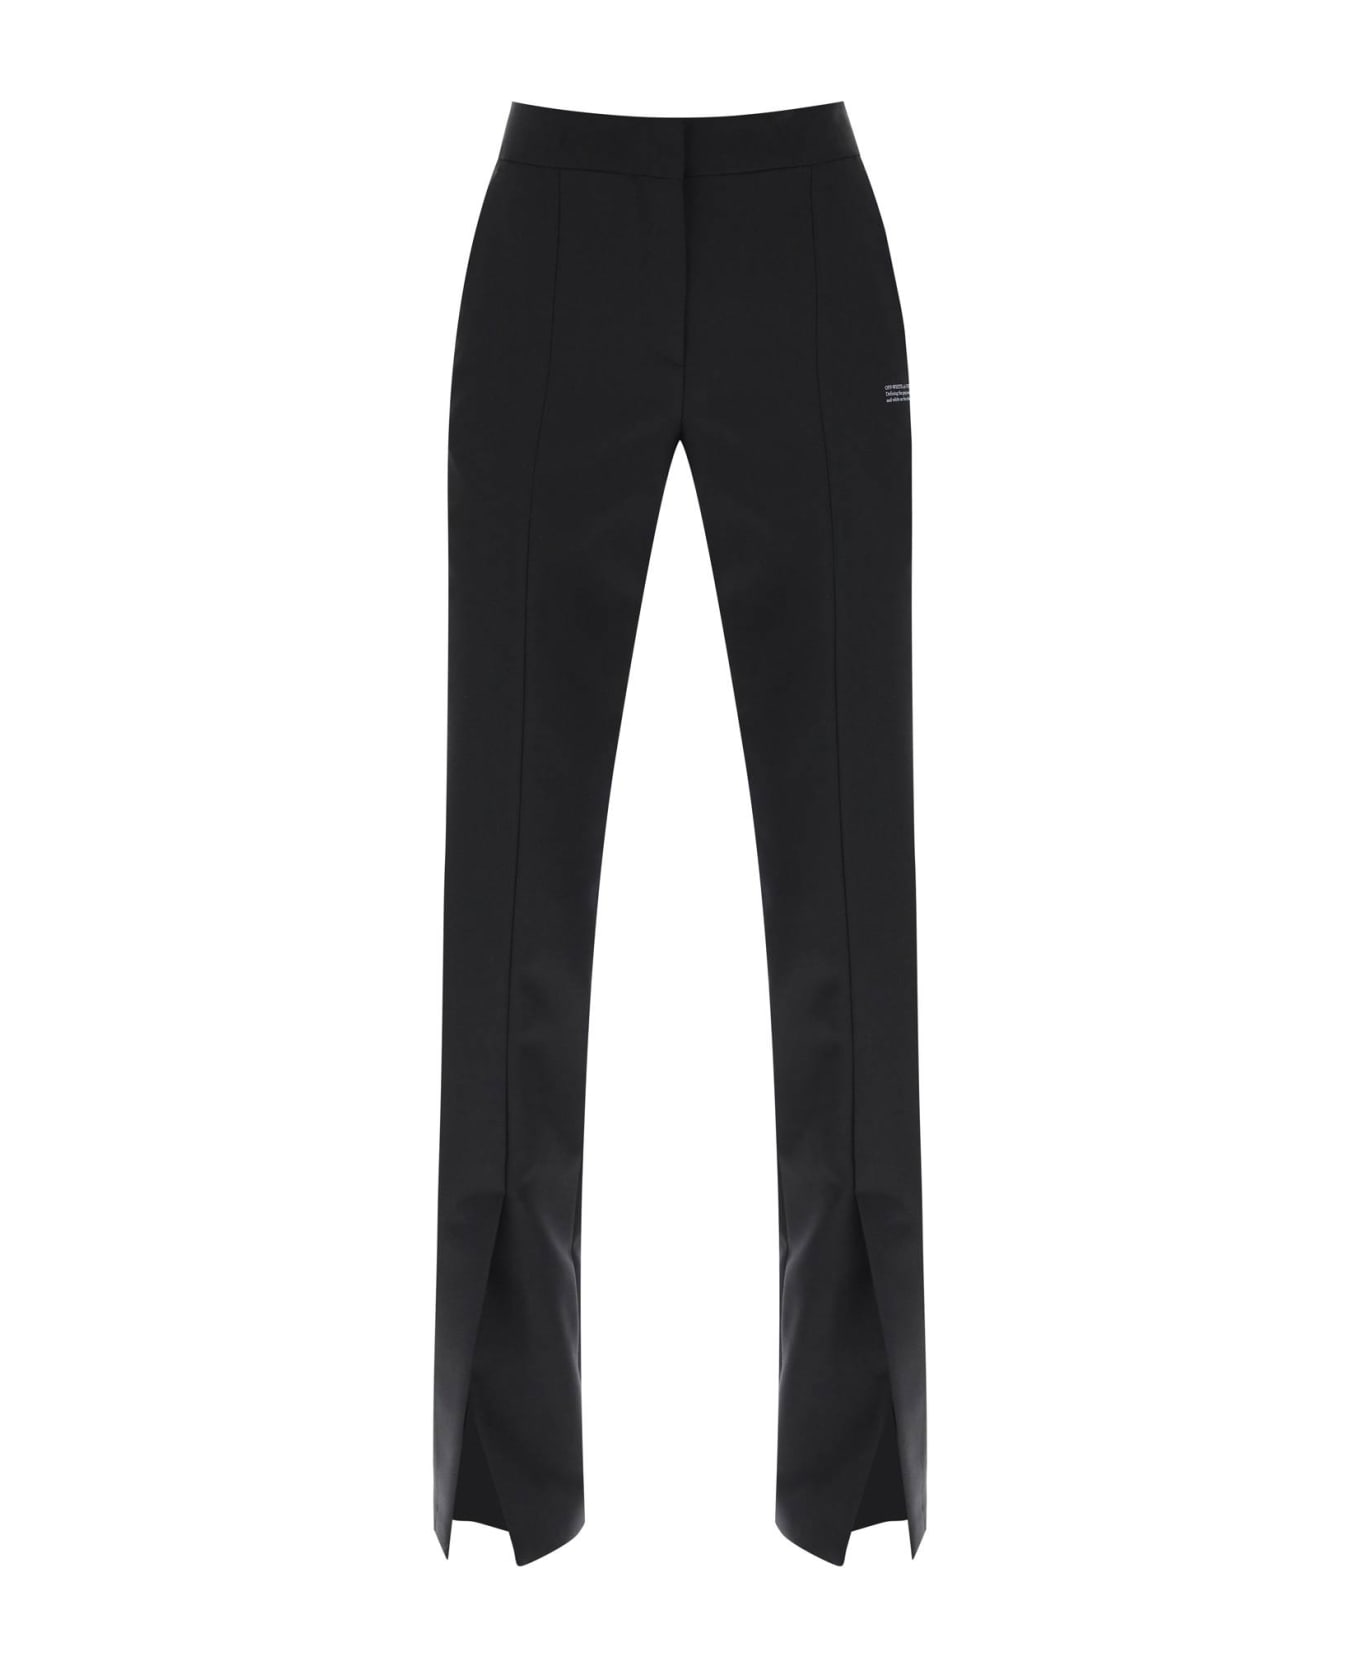 Off-White Corporate Tailoring Pants - Black ボトムス